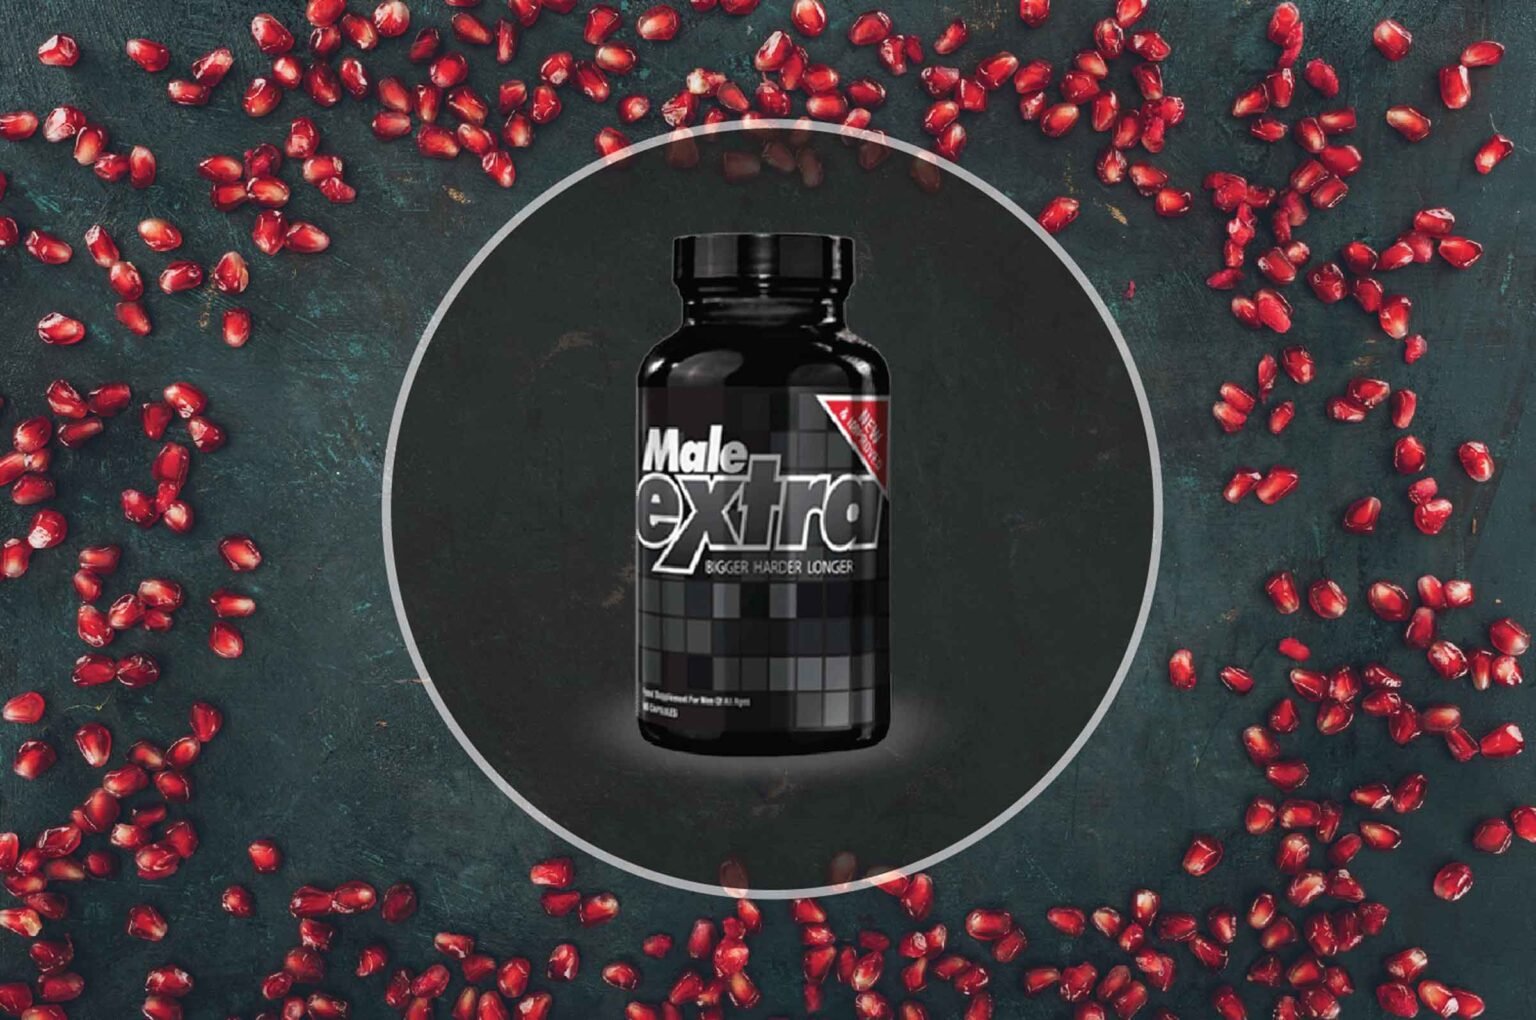 Are you looking for a supplement that can improve sexual performance? Learn all about Male Extra, read the reviews, and decide if it is right for you!